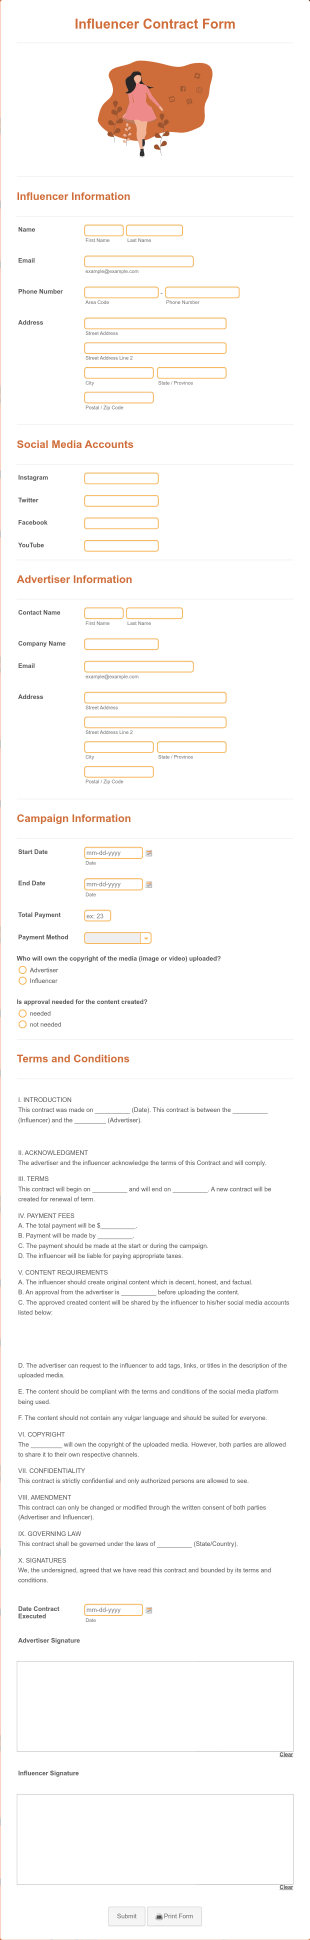 Influencer Contract Form Template